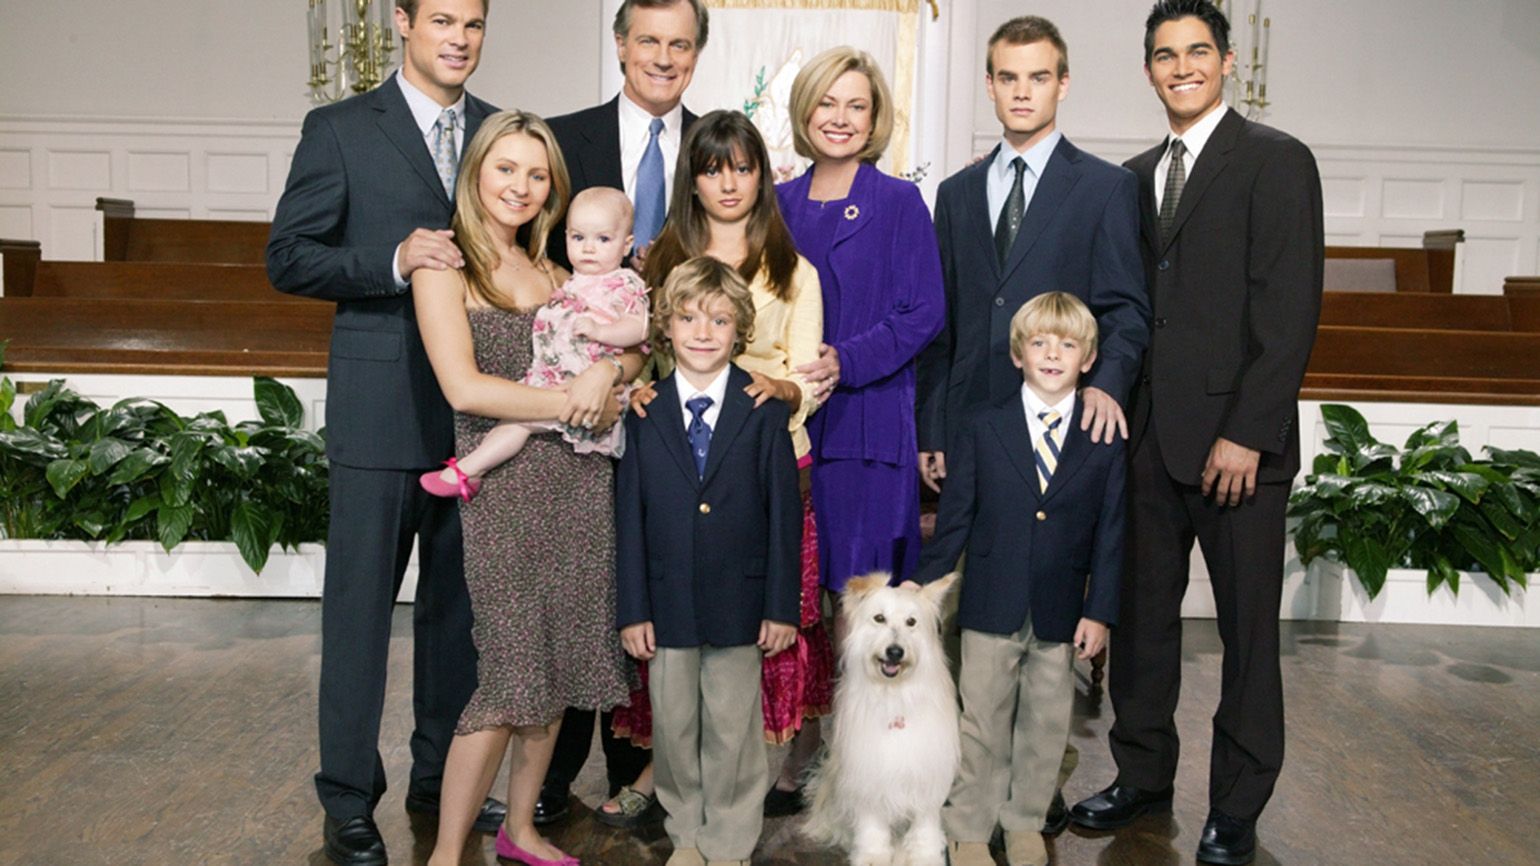 The cast of 7th Heaven